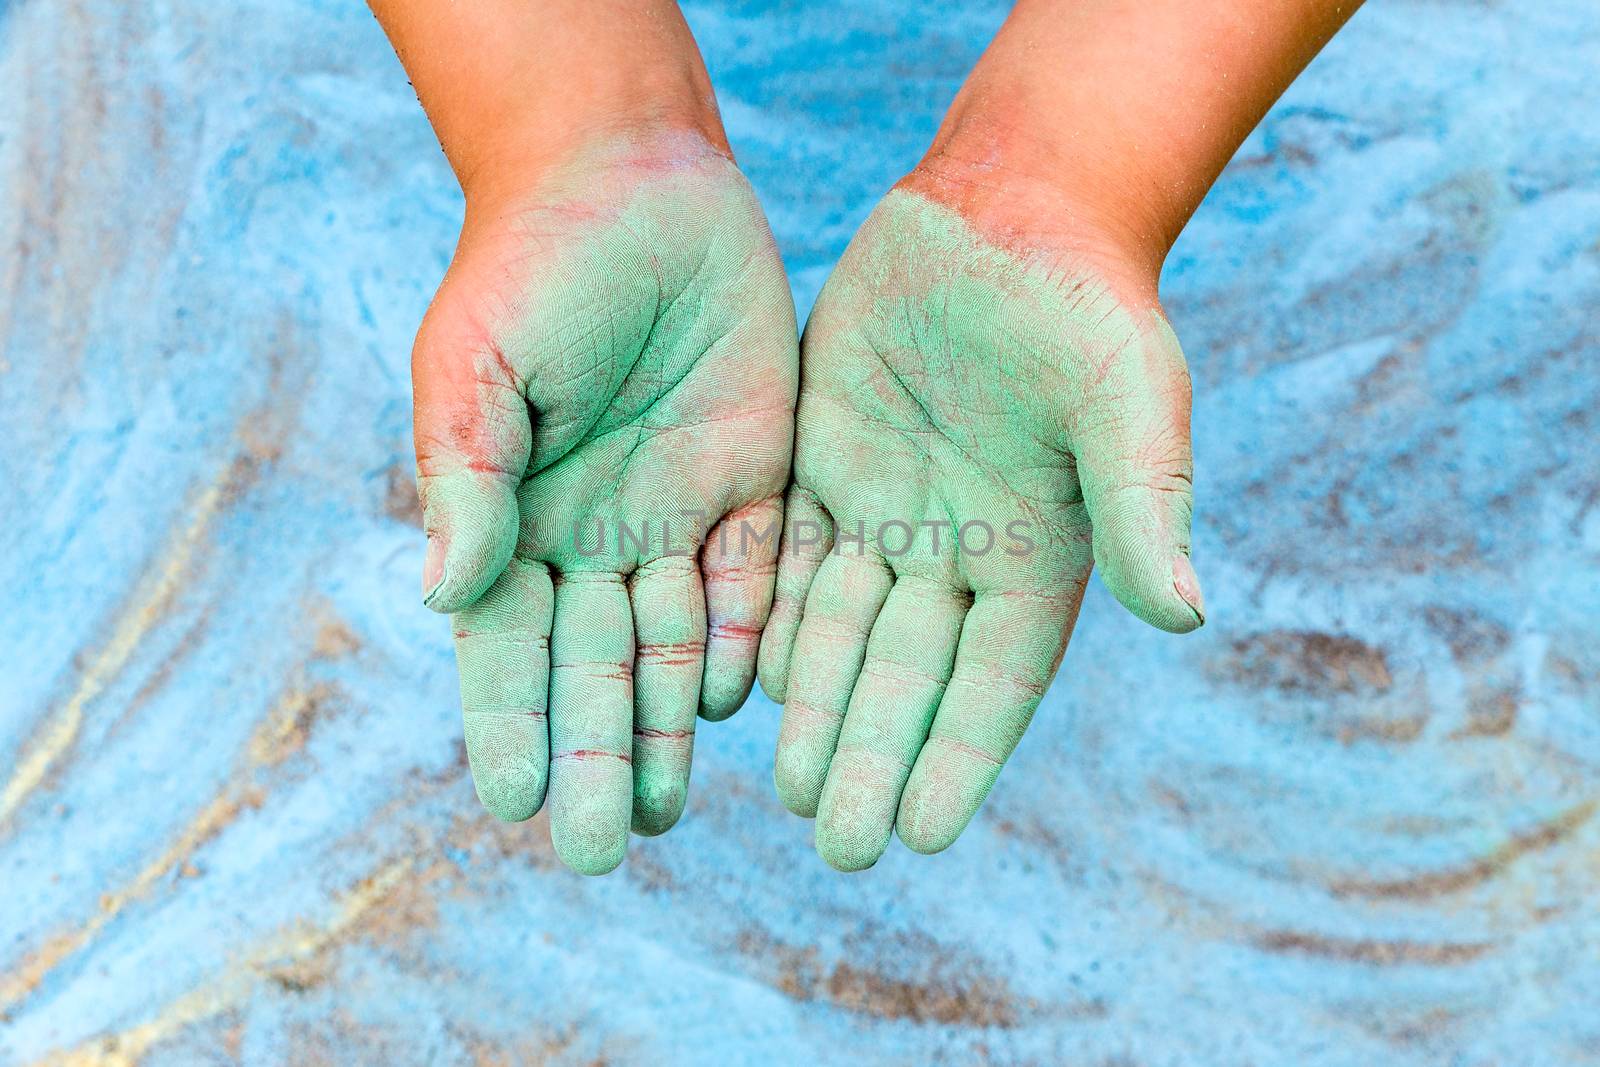 Toddler showing green hands with chalk on blue background